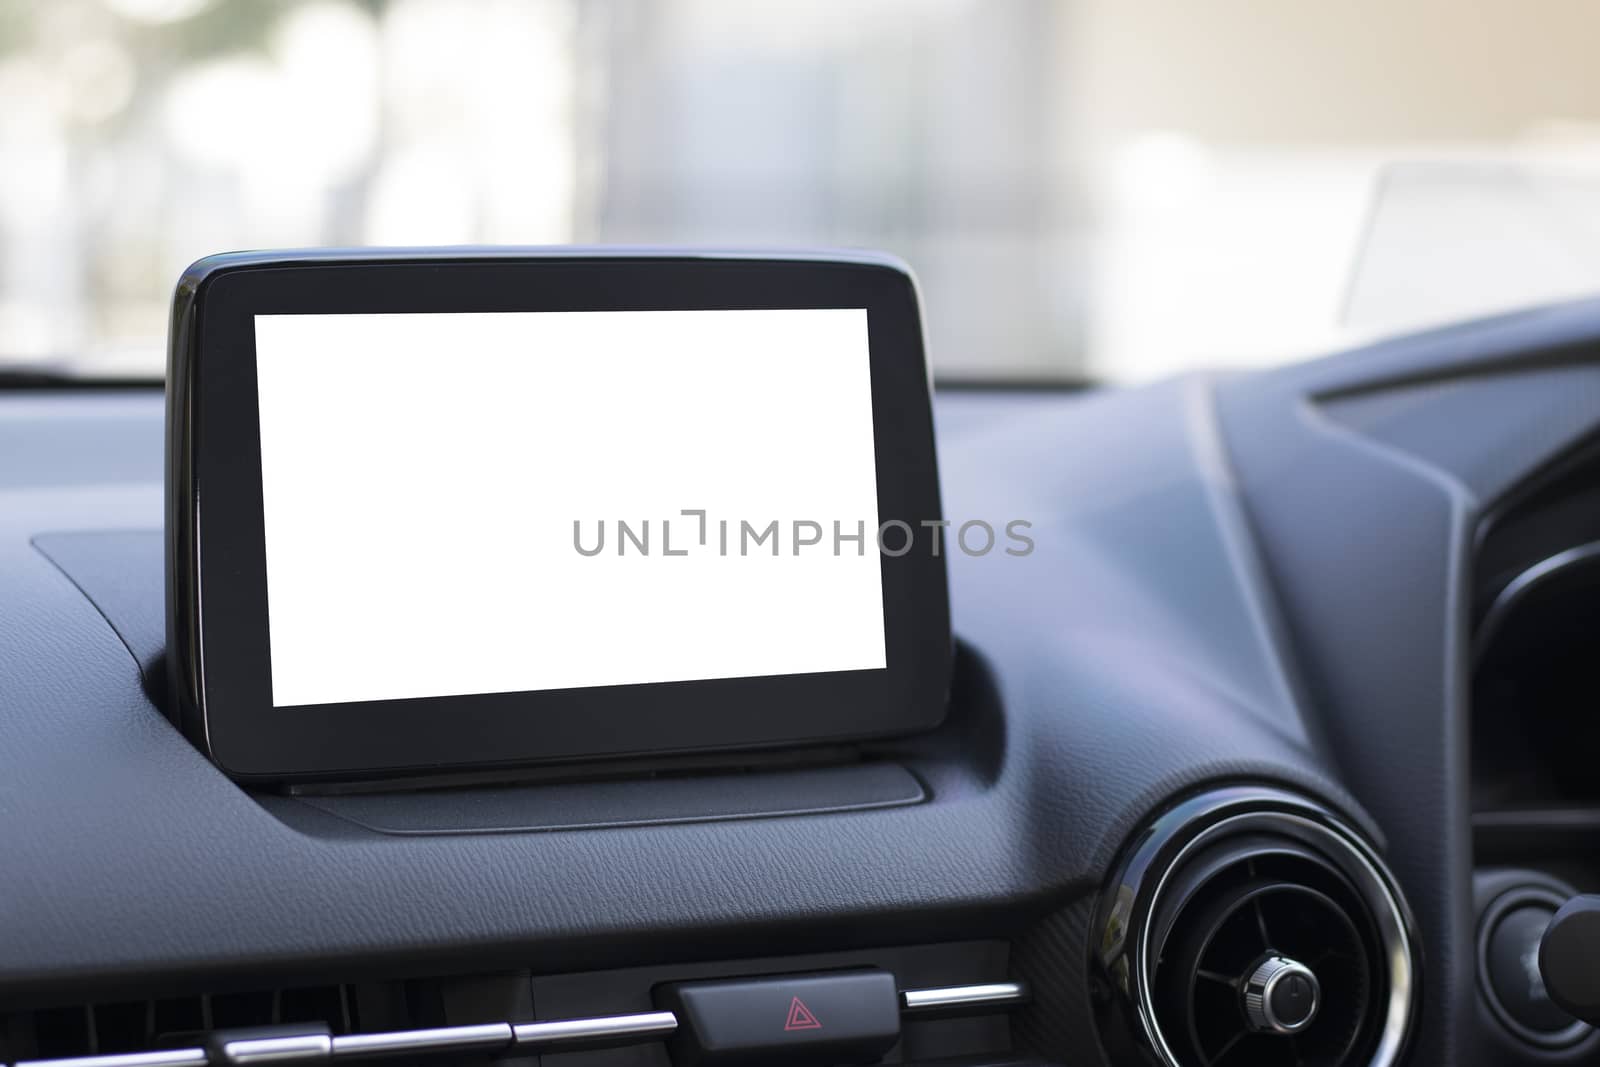 Touch screen monitor for using various applications such as entertainment,communications,navigation. Touch screen for operating various car applications. by Eungsuwat